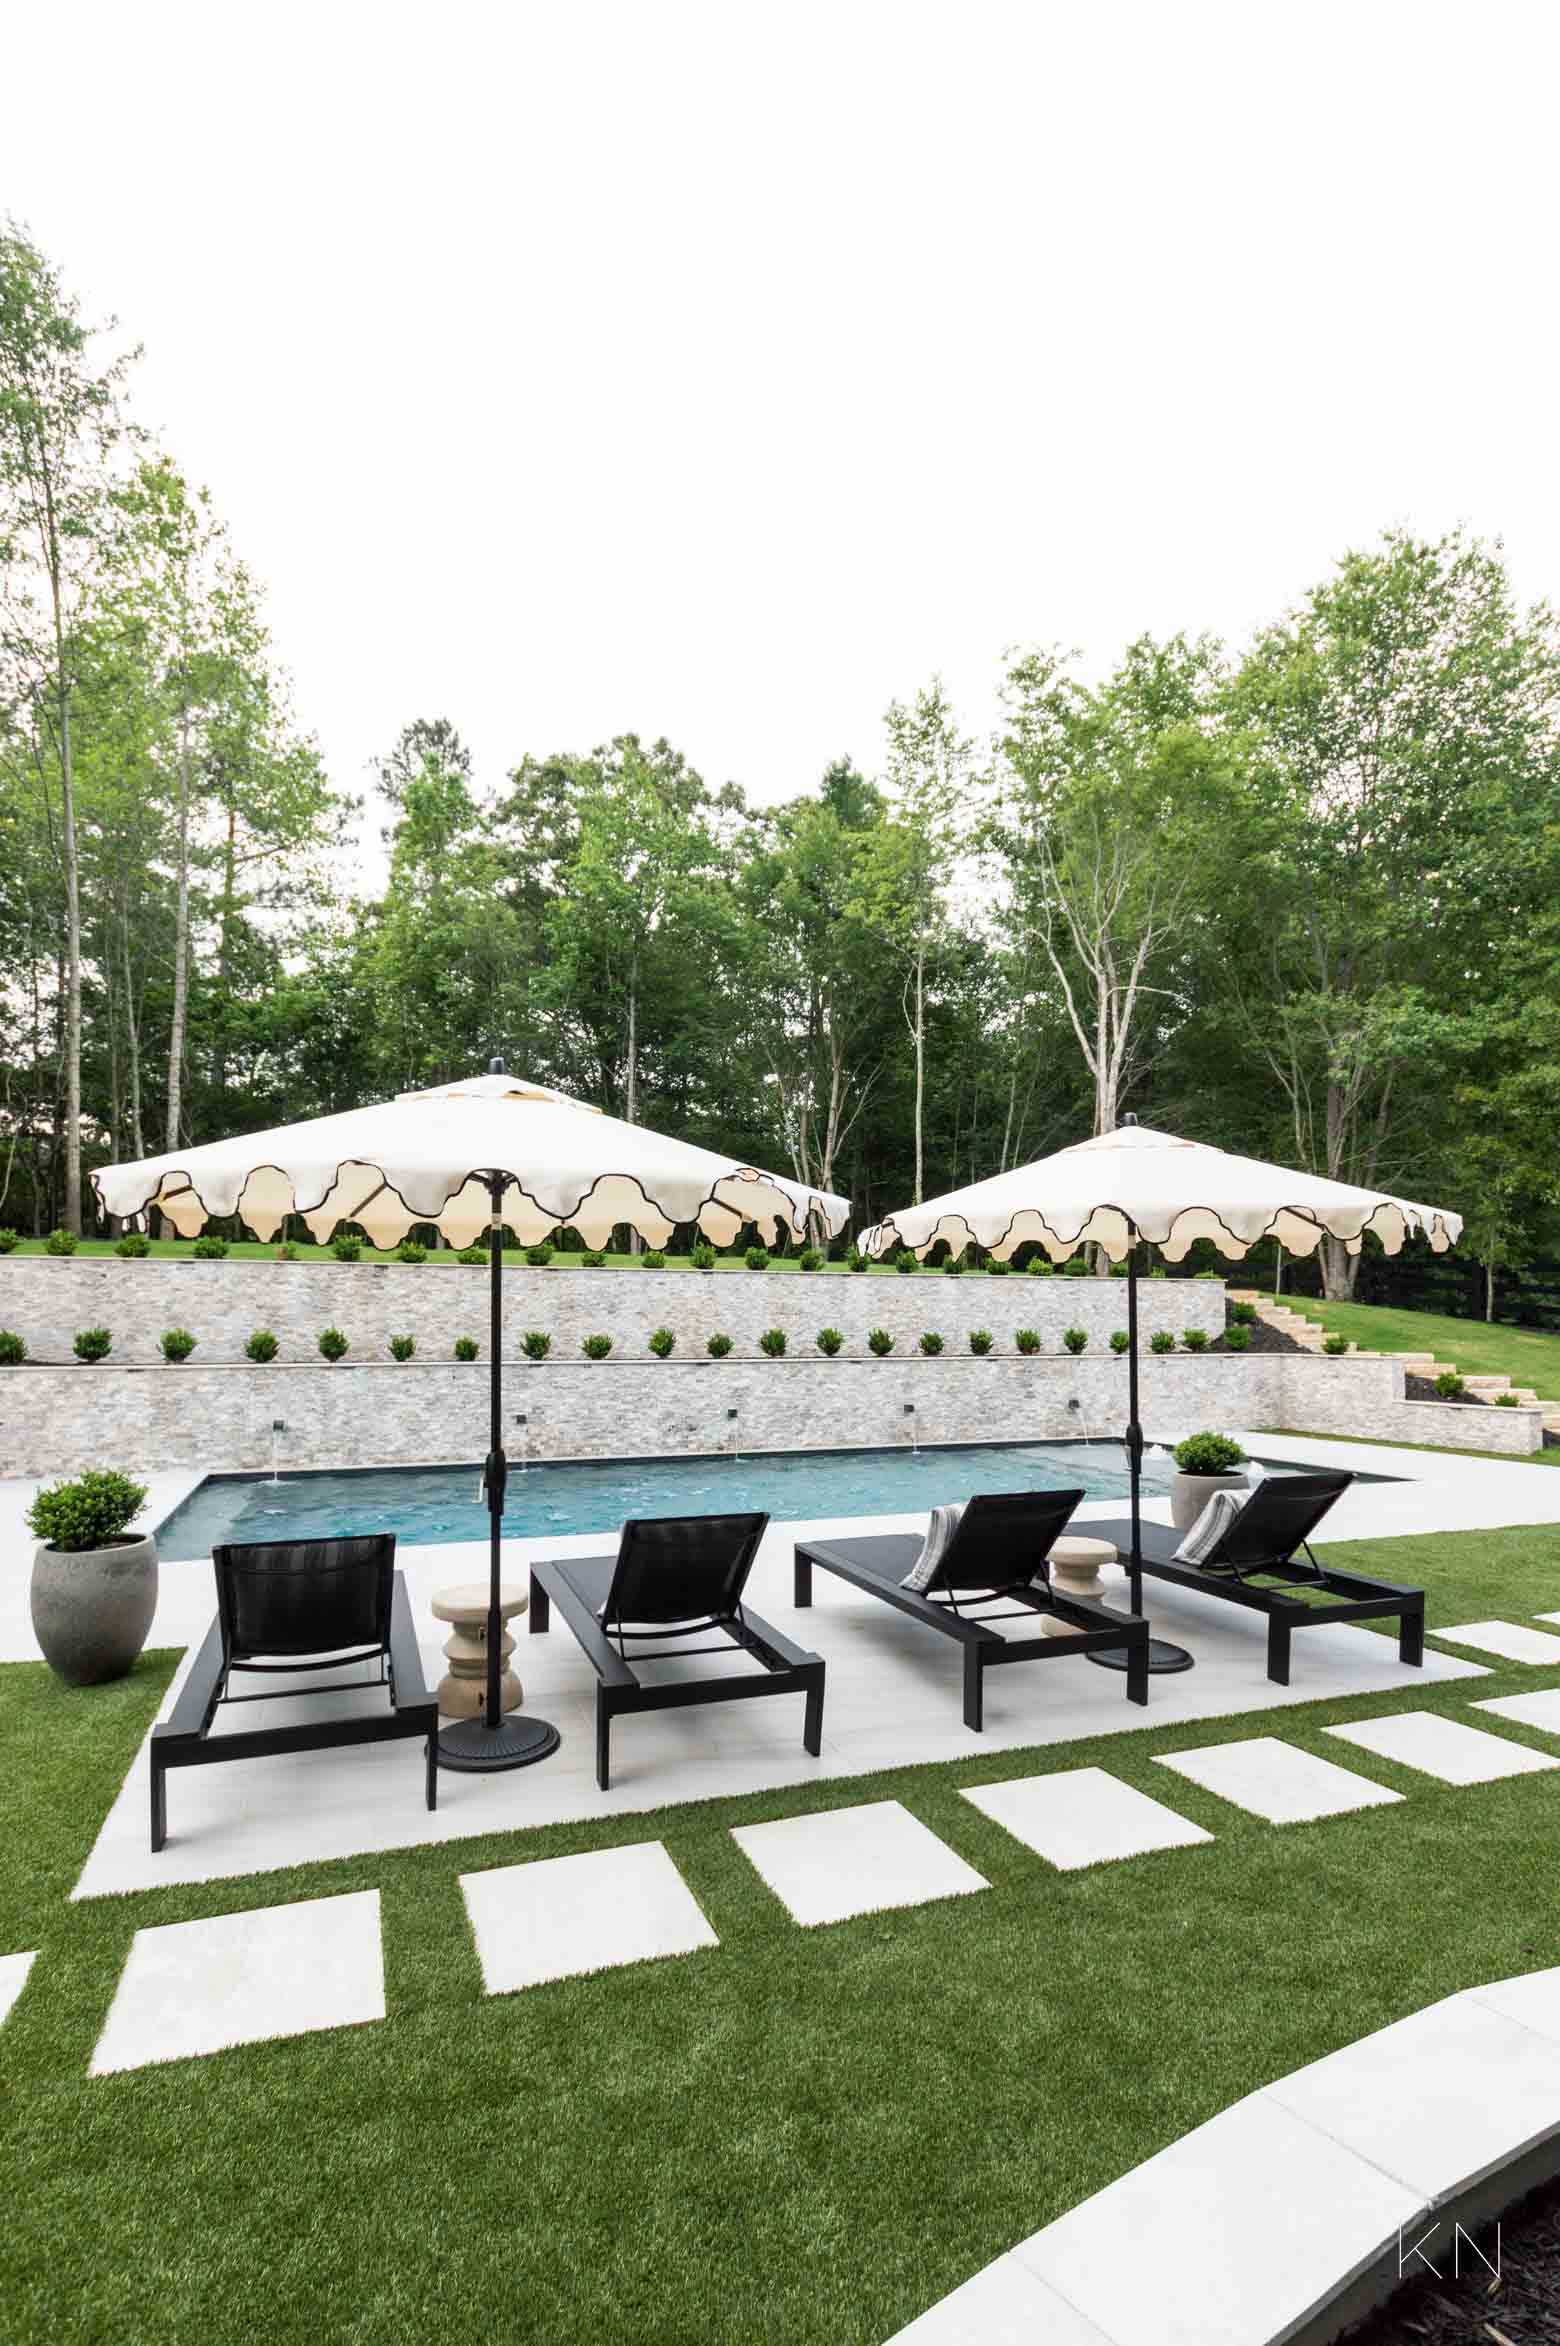 French Gray Pool Design, Featuring A Hamptons Style Garden Vibe